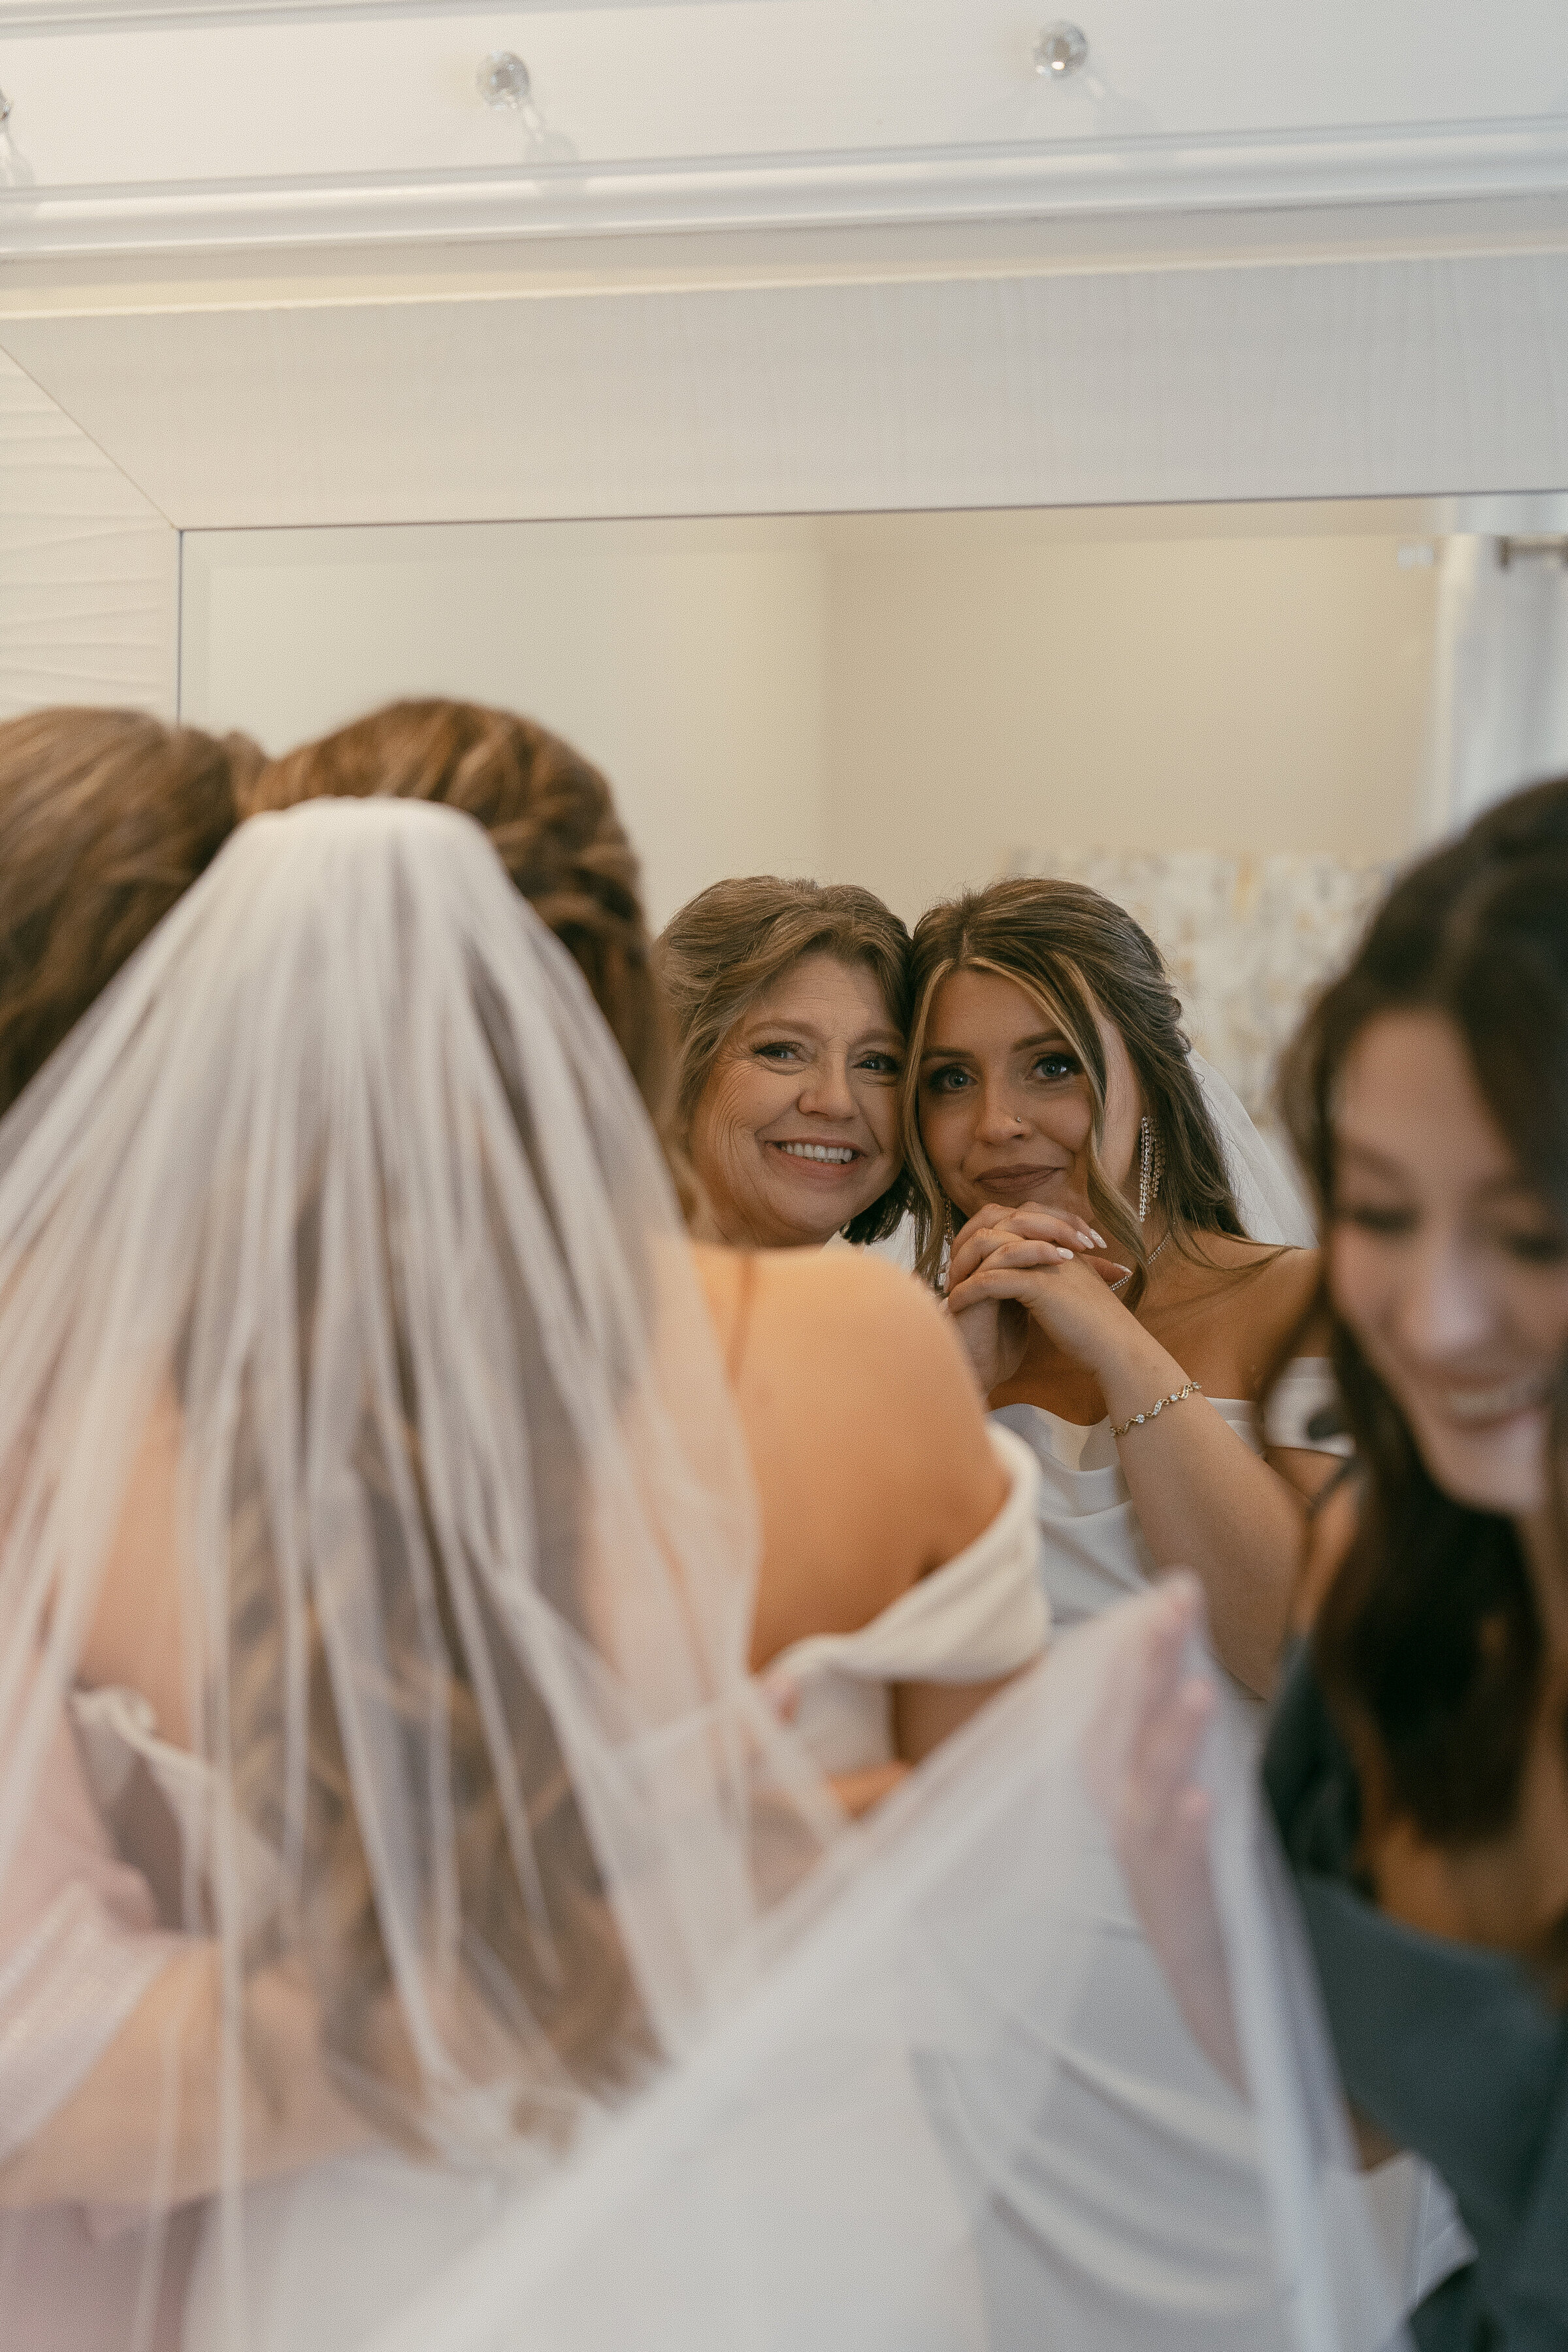 Mother and bride smiling in the mirror, a tender moment during wedding preparations.